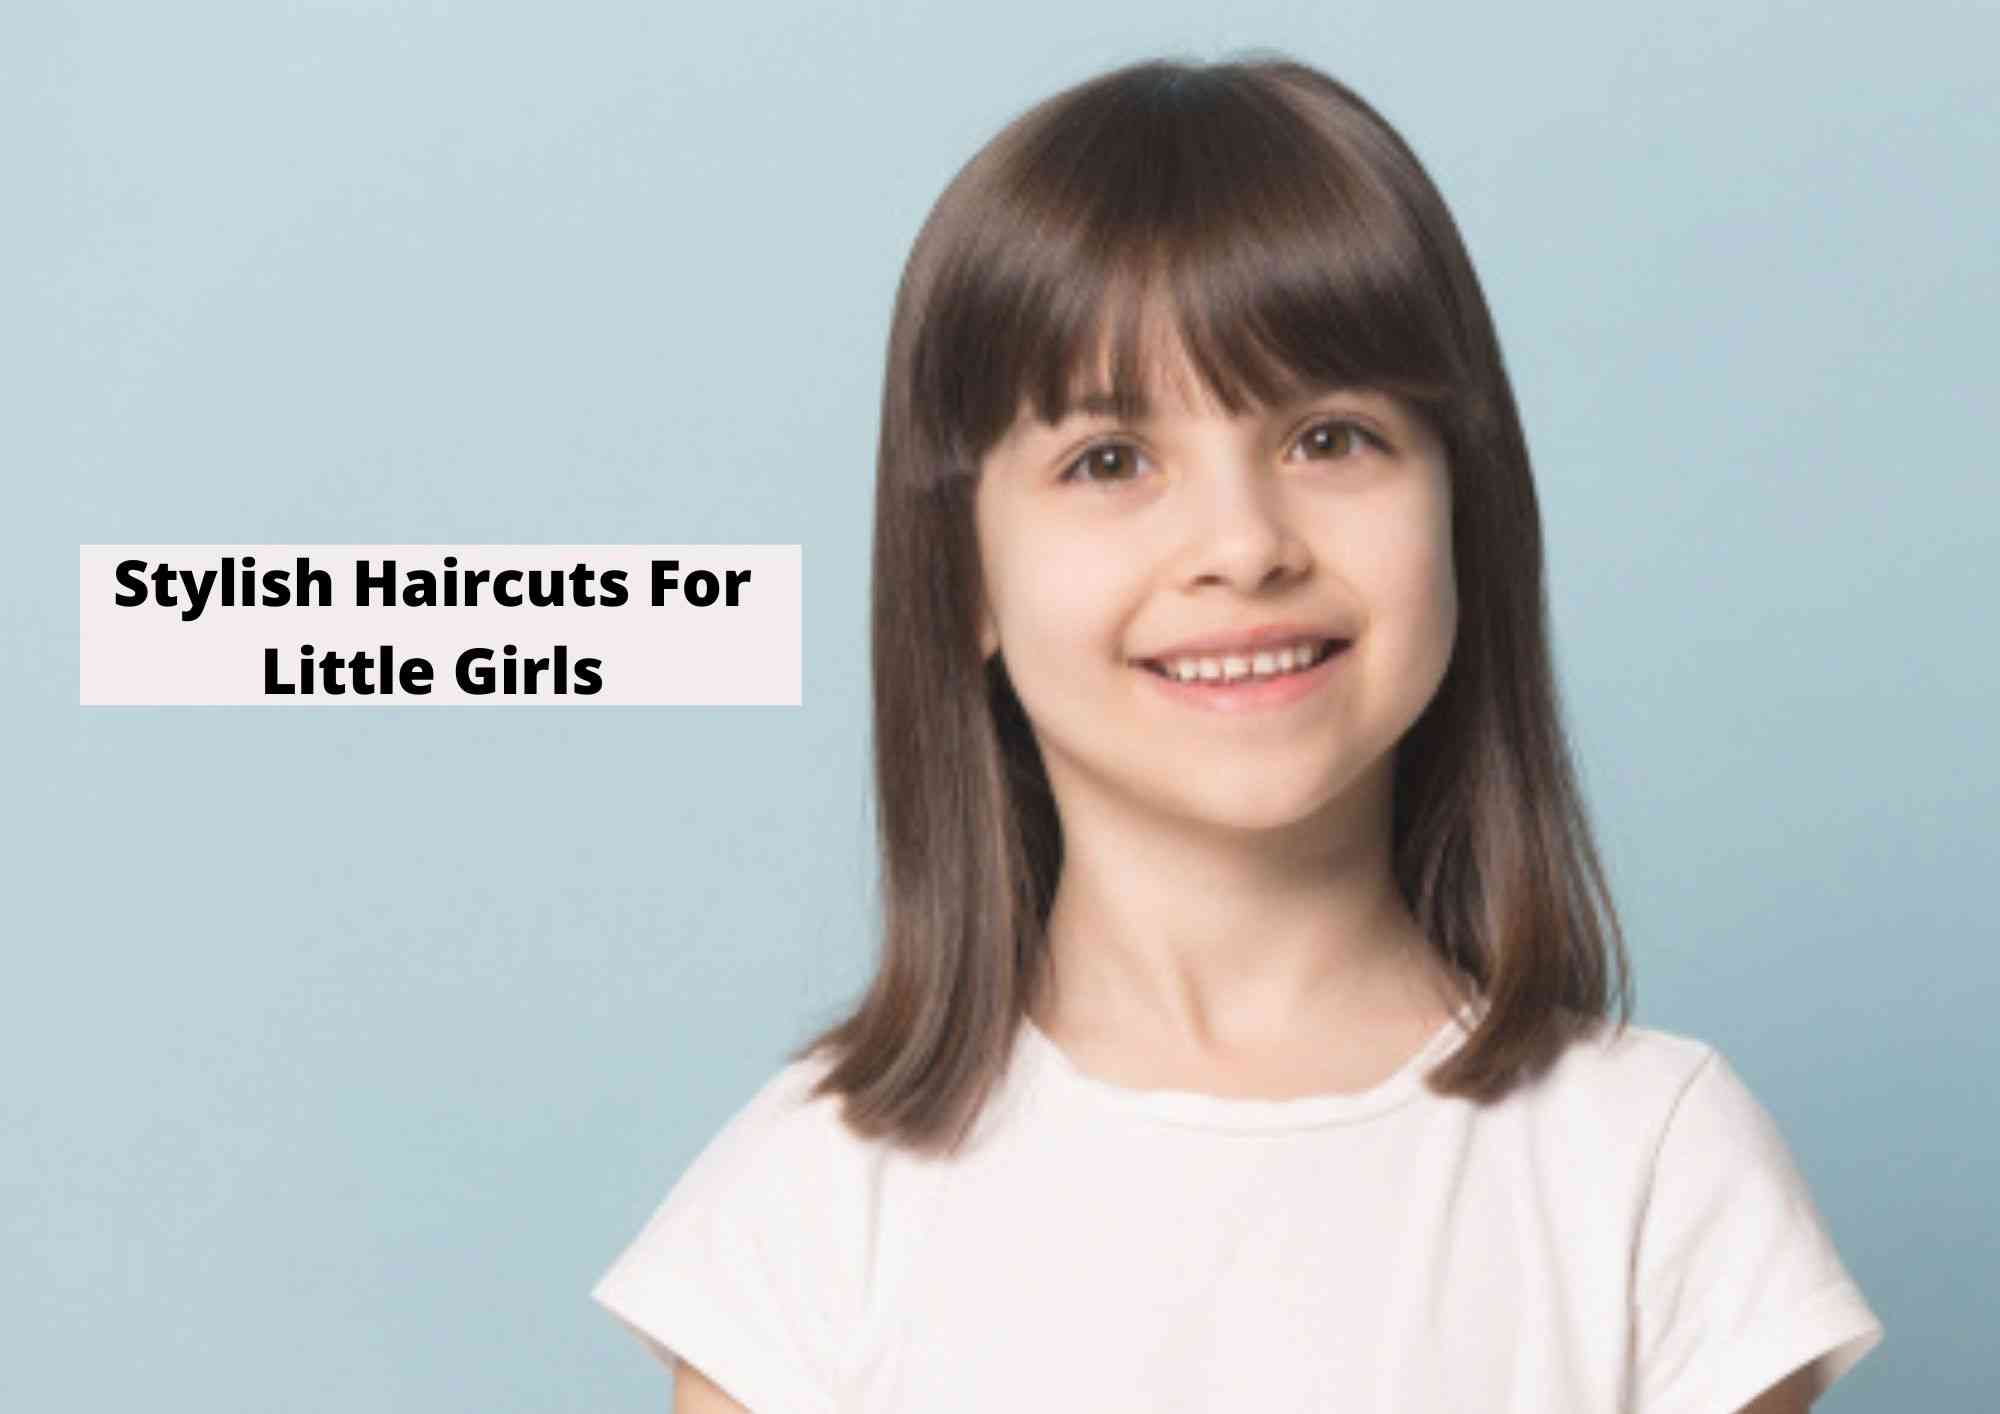 Short Haircuts And Hairstyles For Girls In 2023-24 | FashionEven